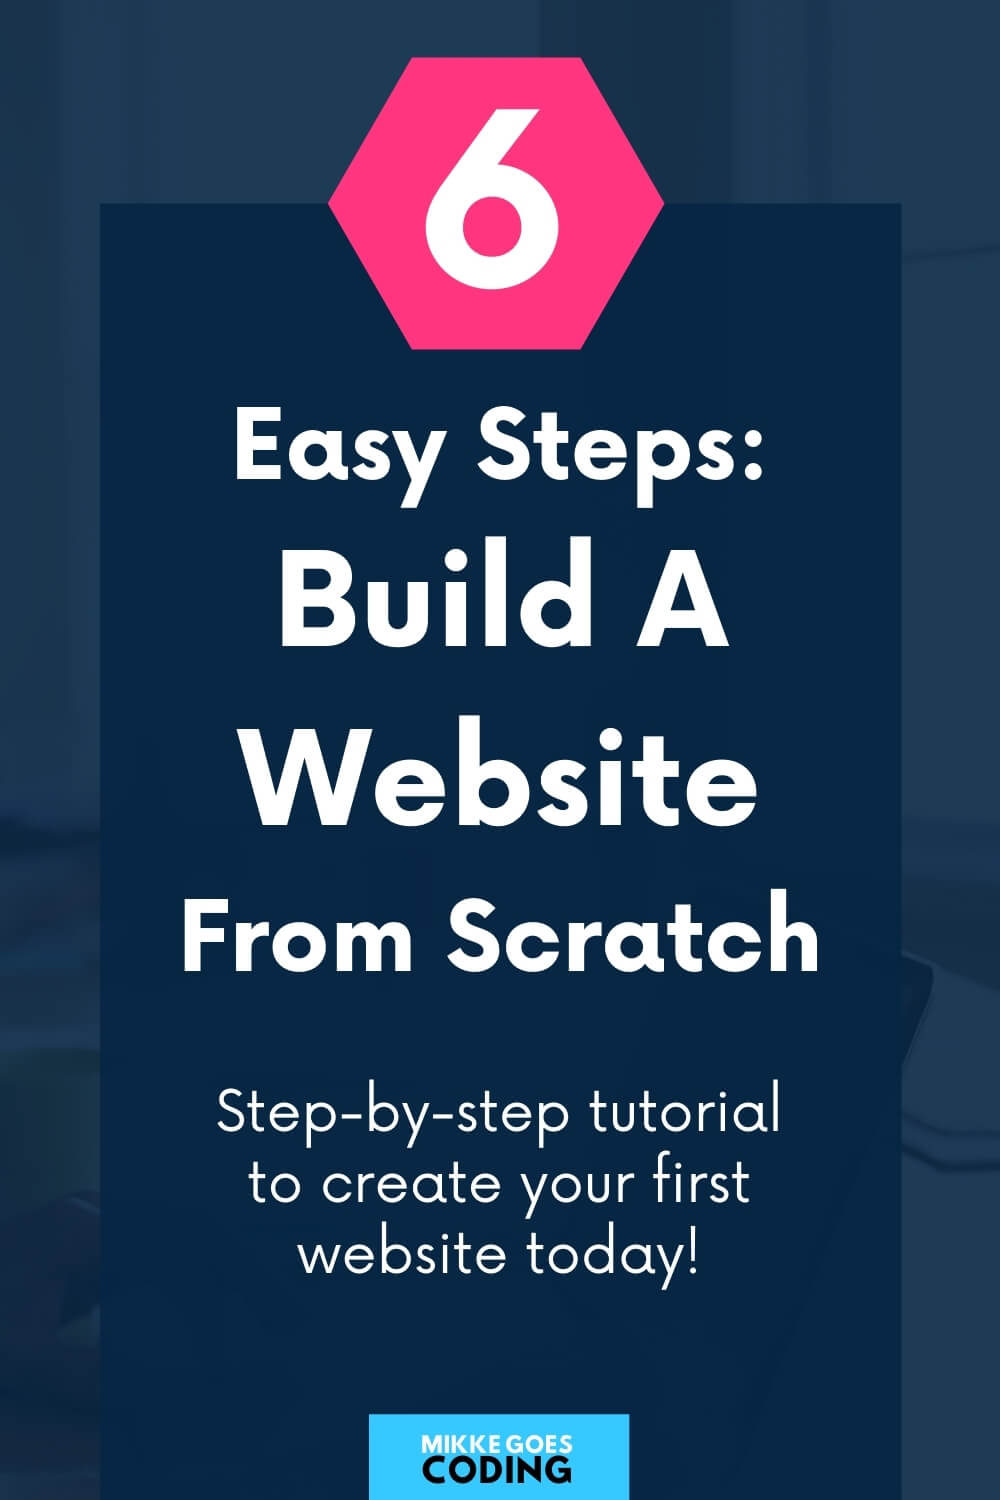 How to Build a Website From Scratch in 26: The Ultimate Guide